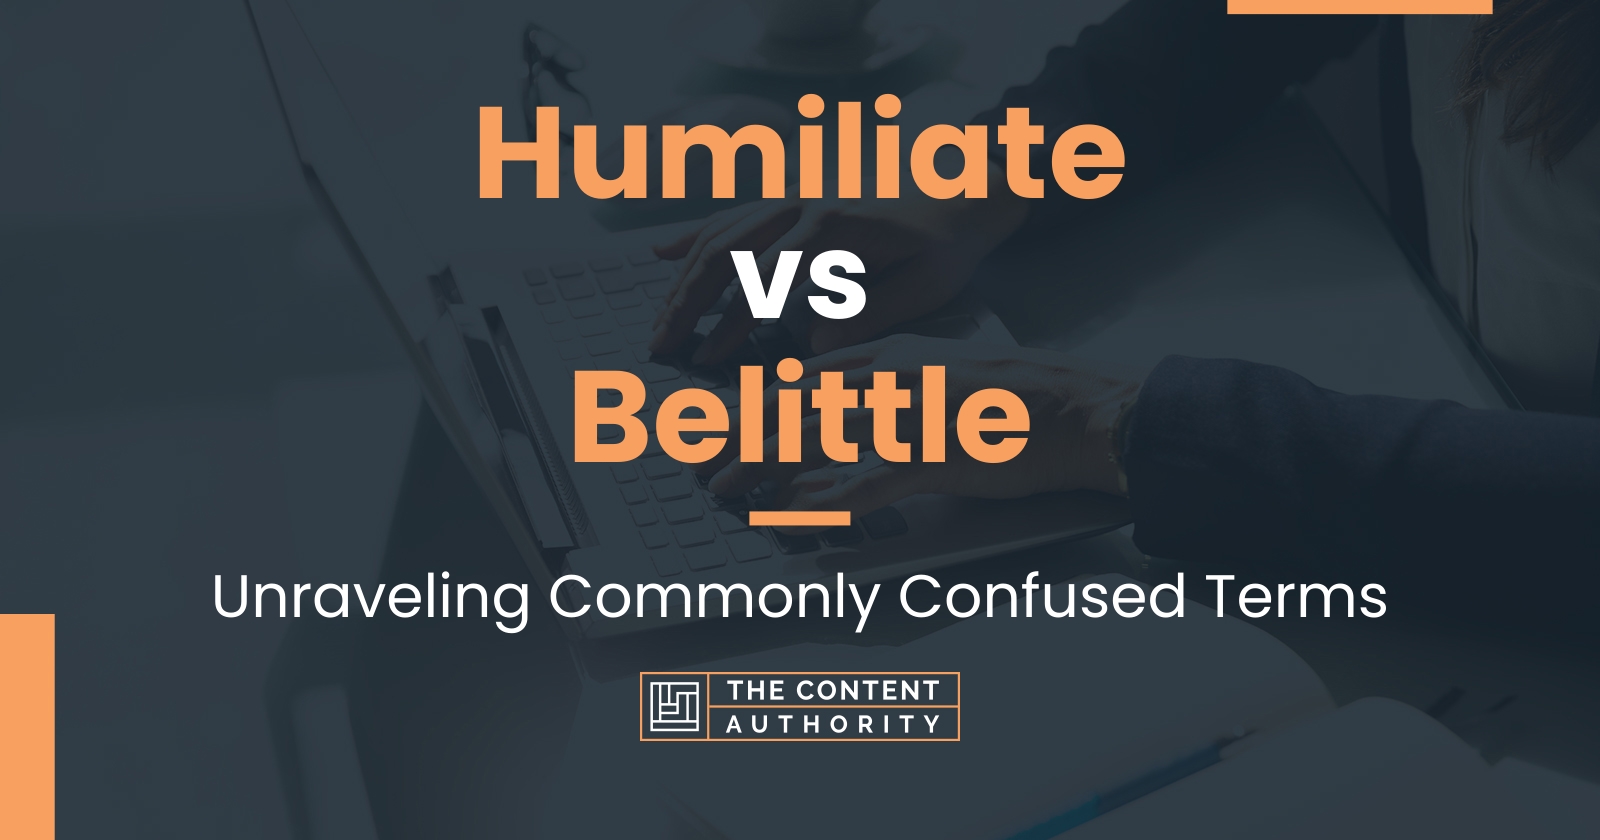 Humiliate vs Belittle: Unraveling Commonly Confused Terms